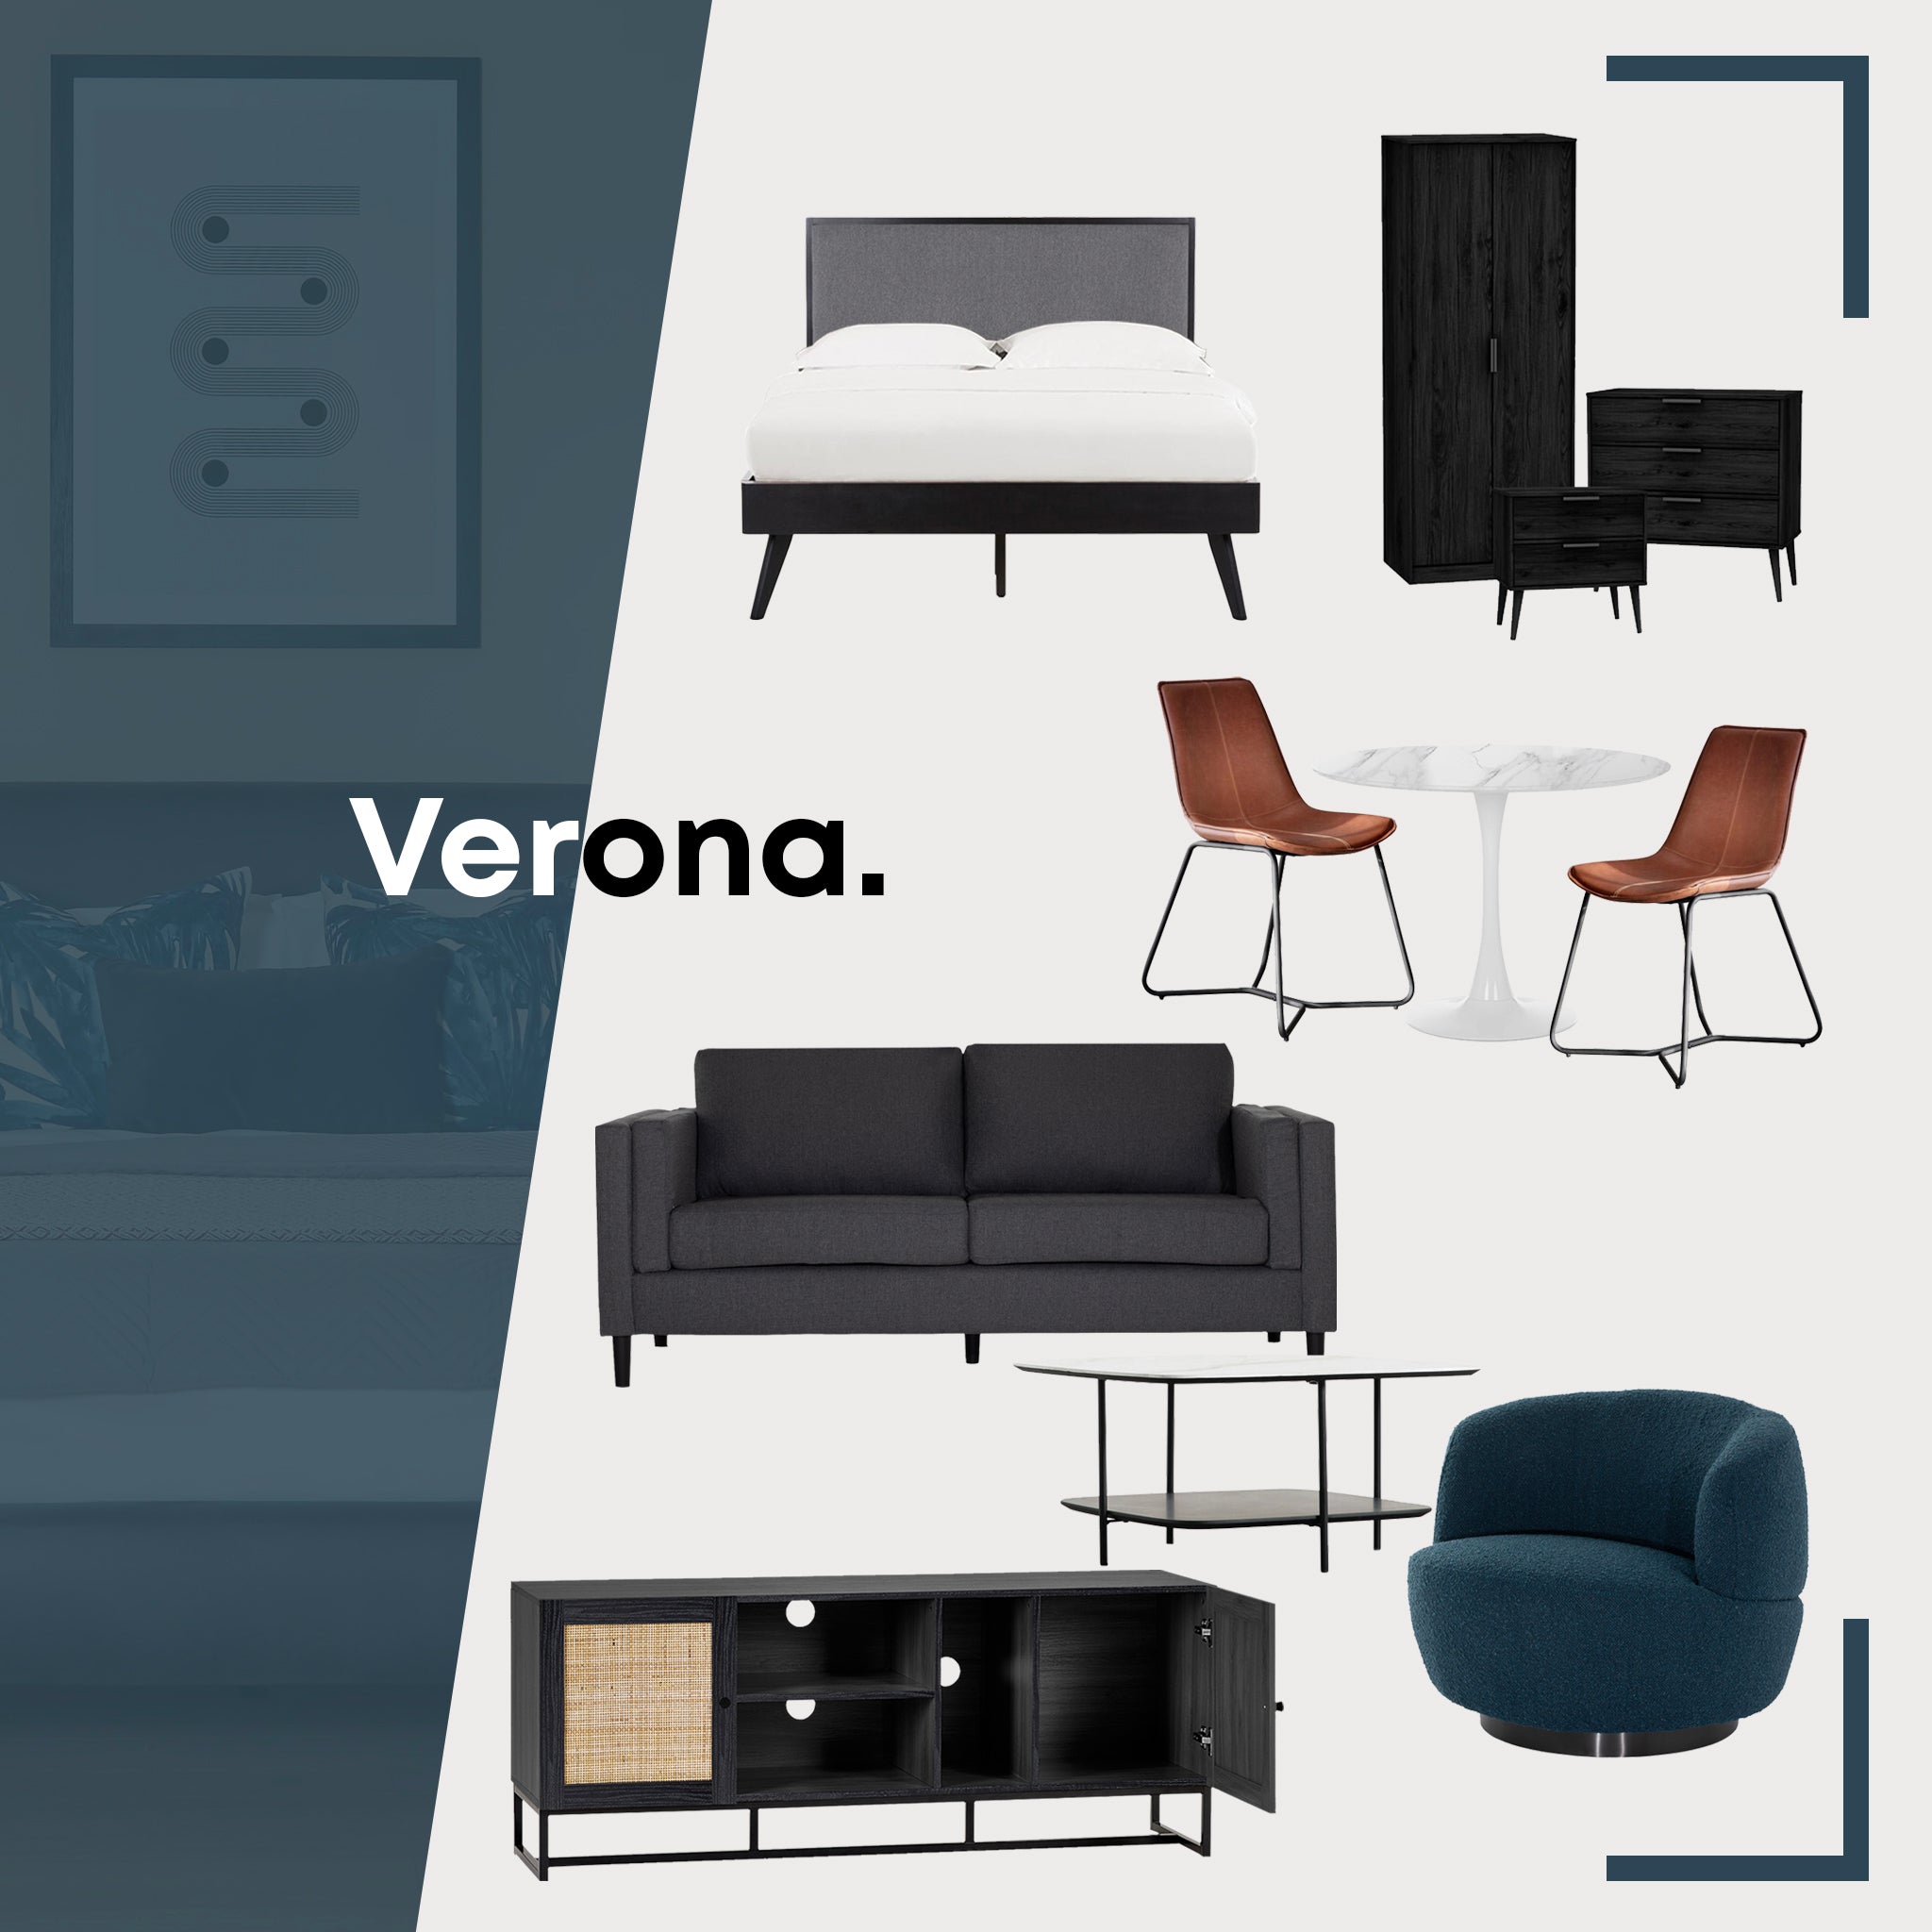 The Verona Furniture Package